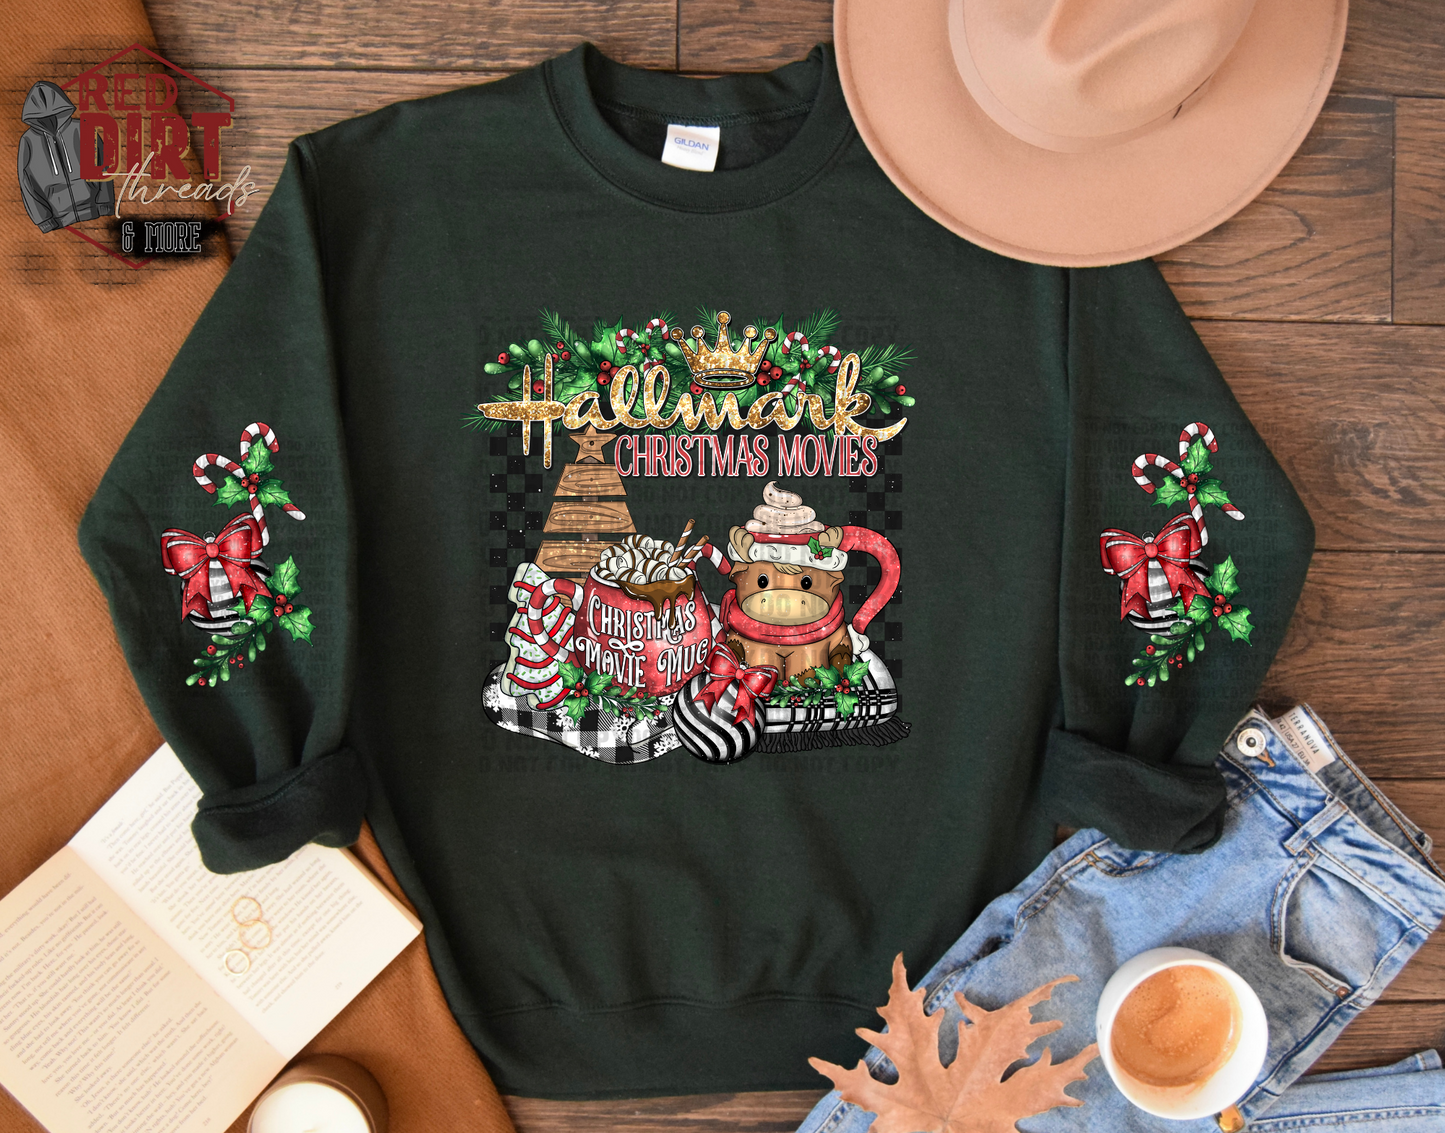 Christmas Movies and Hot Cocoa Sweat Shirt | Trendy Christmas Hoodie with Sleeves | Fast Shipping | Super Soft Shirts for Women